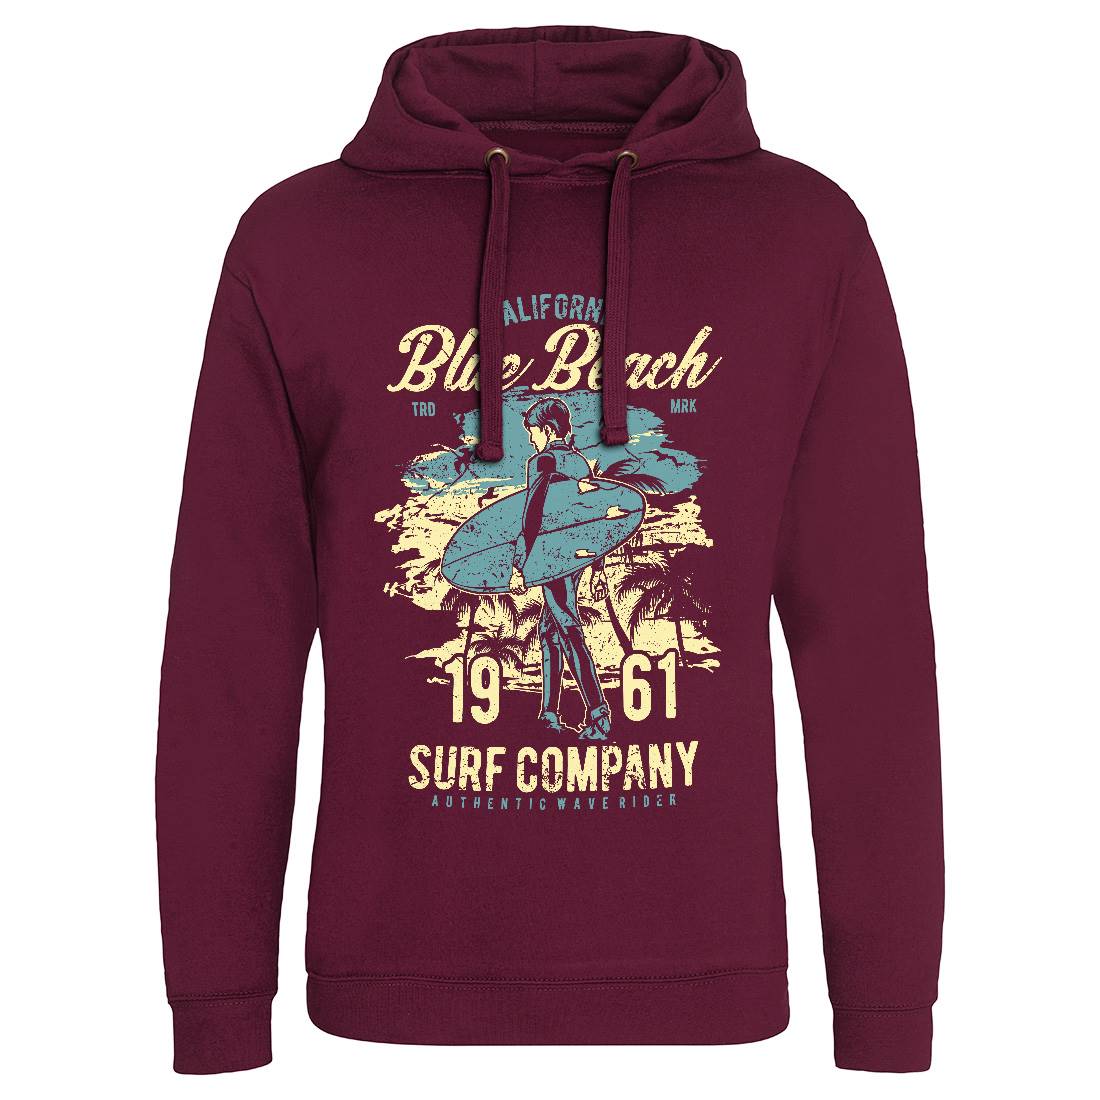 Blue Beach Mens Hoodie Without Pocket Surf A621